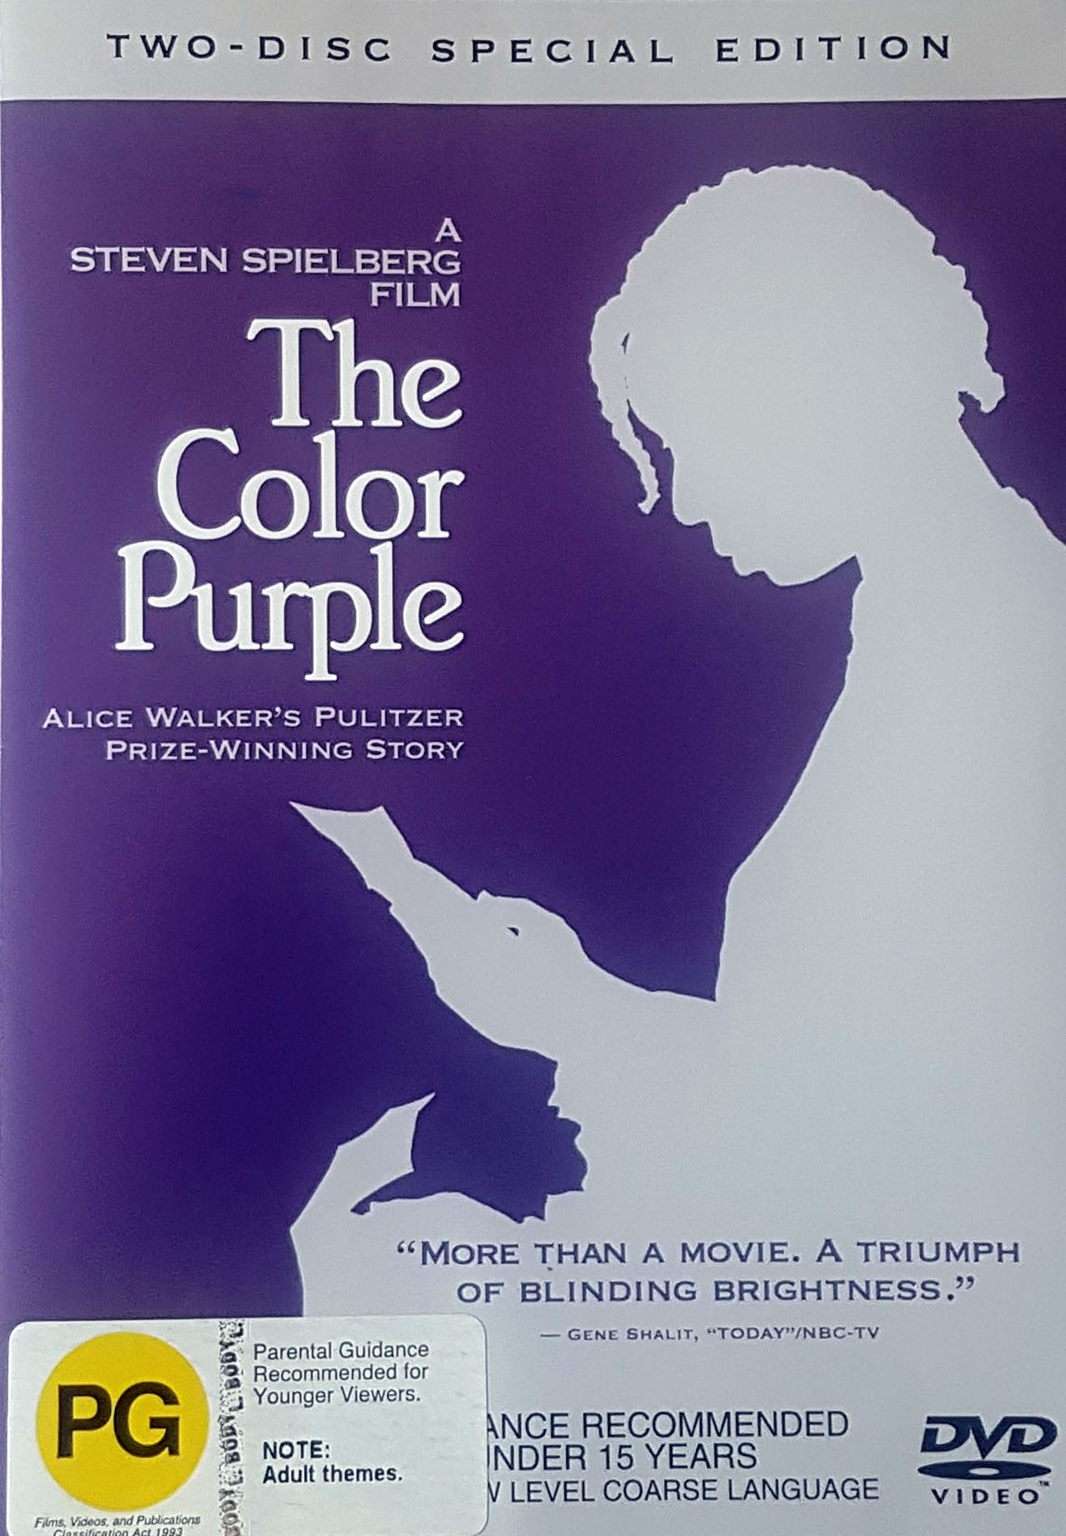 The Color Purple 2 Disc Special Edition